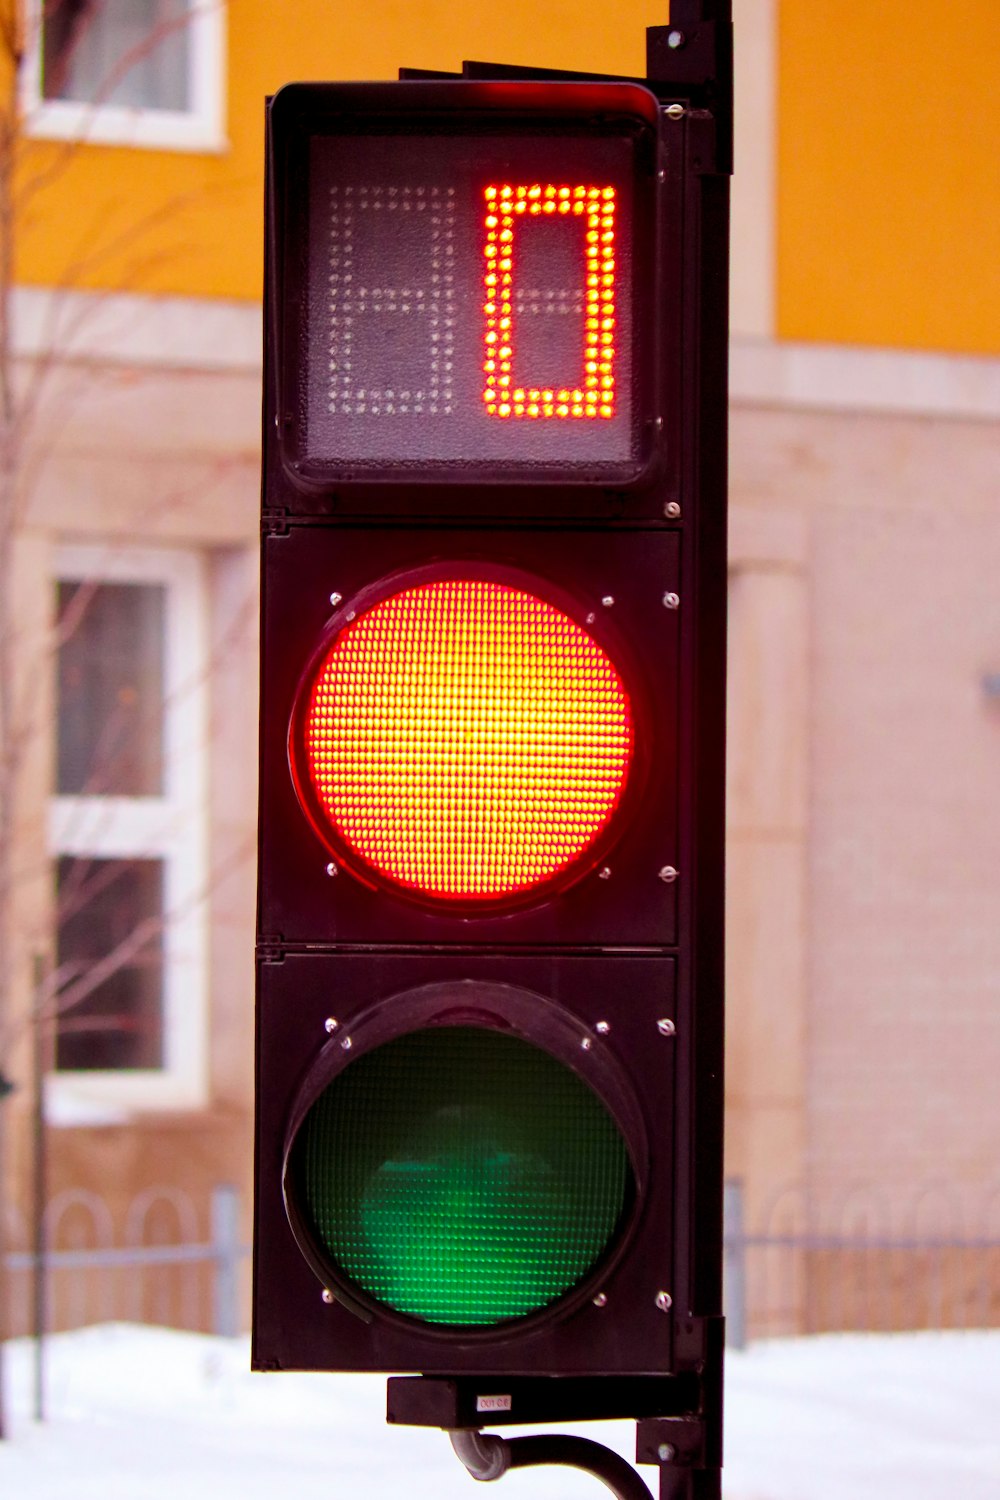 a traffic light with a red and green light